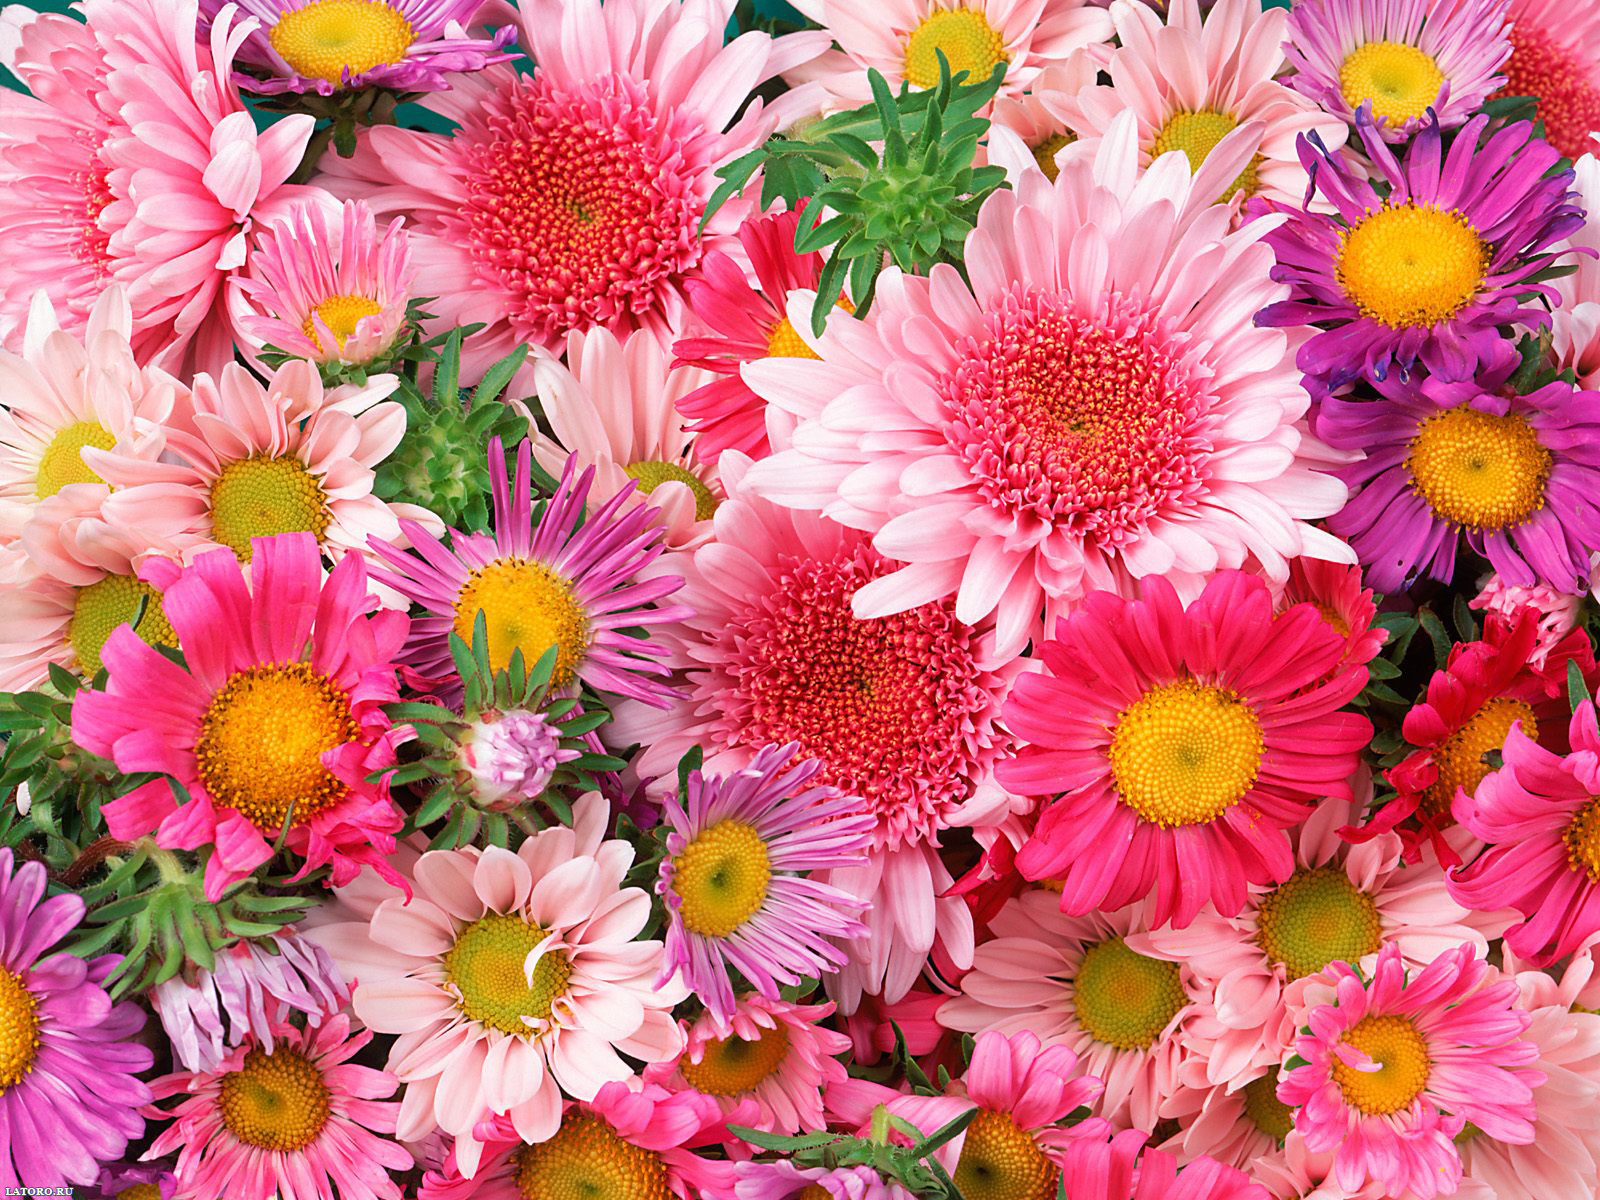 Mixed Daisies Flower Of Passion Mix Image Free Download